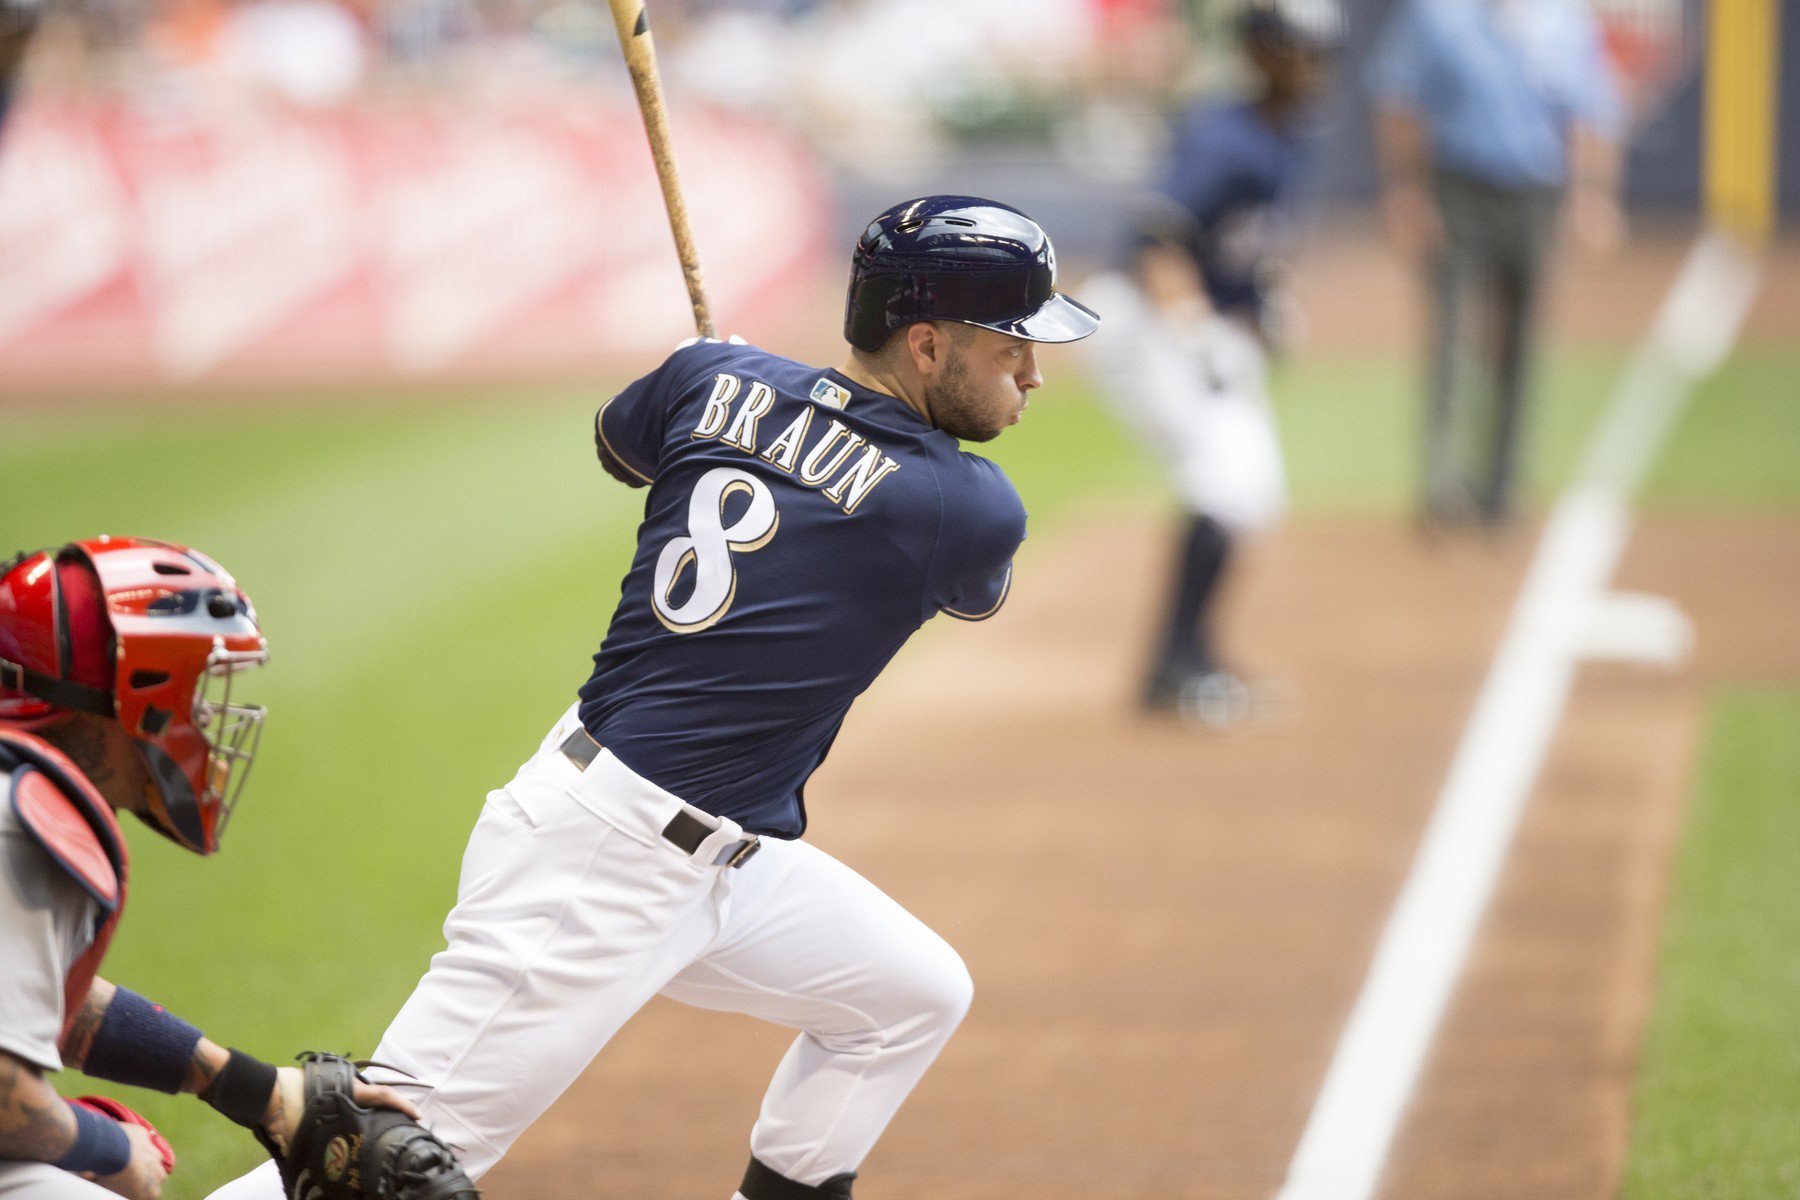 Finding Ryan Braun's role on the 2018 Brewers